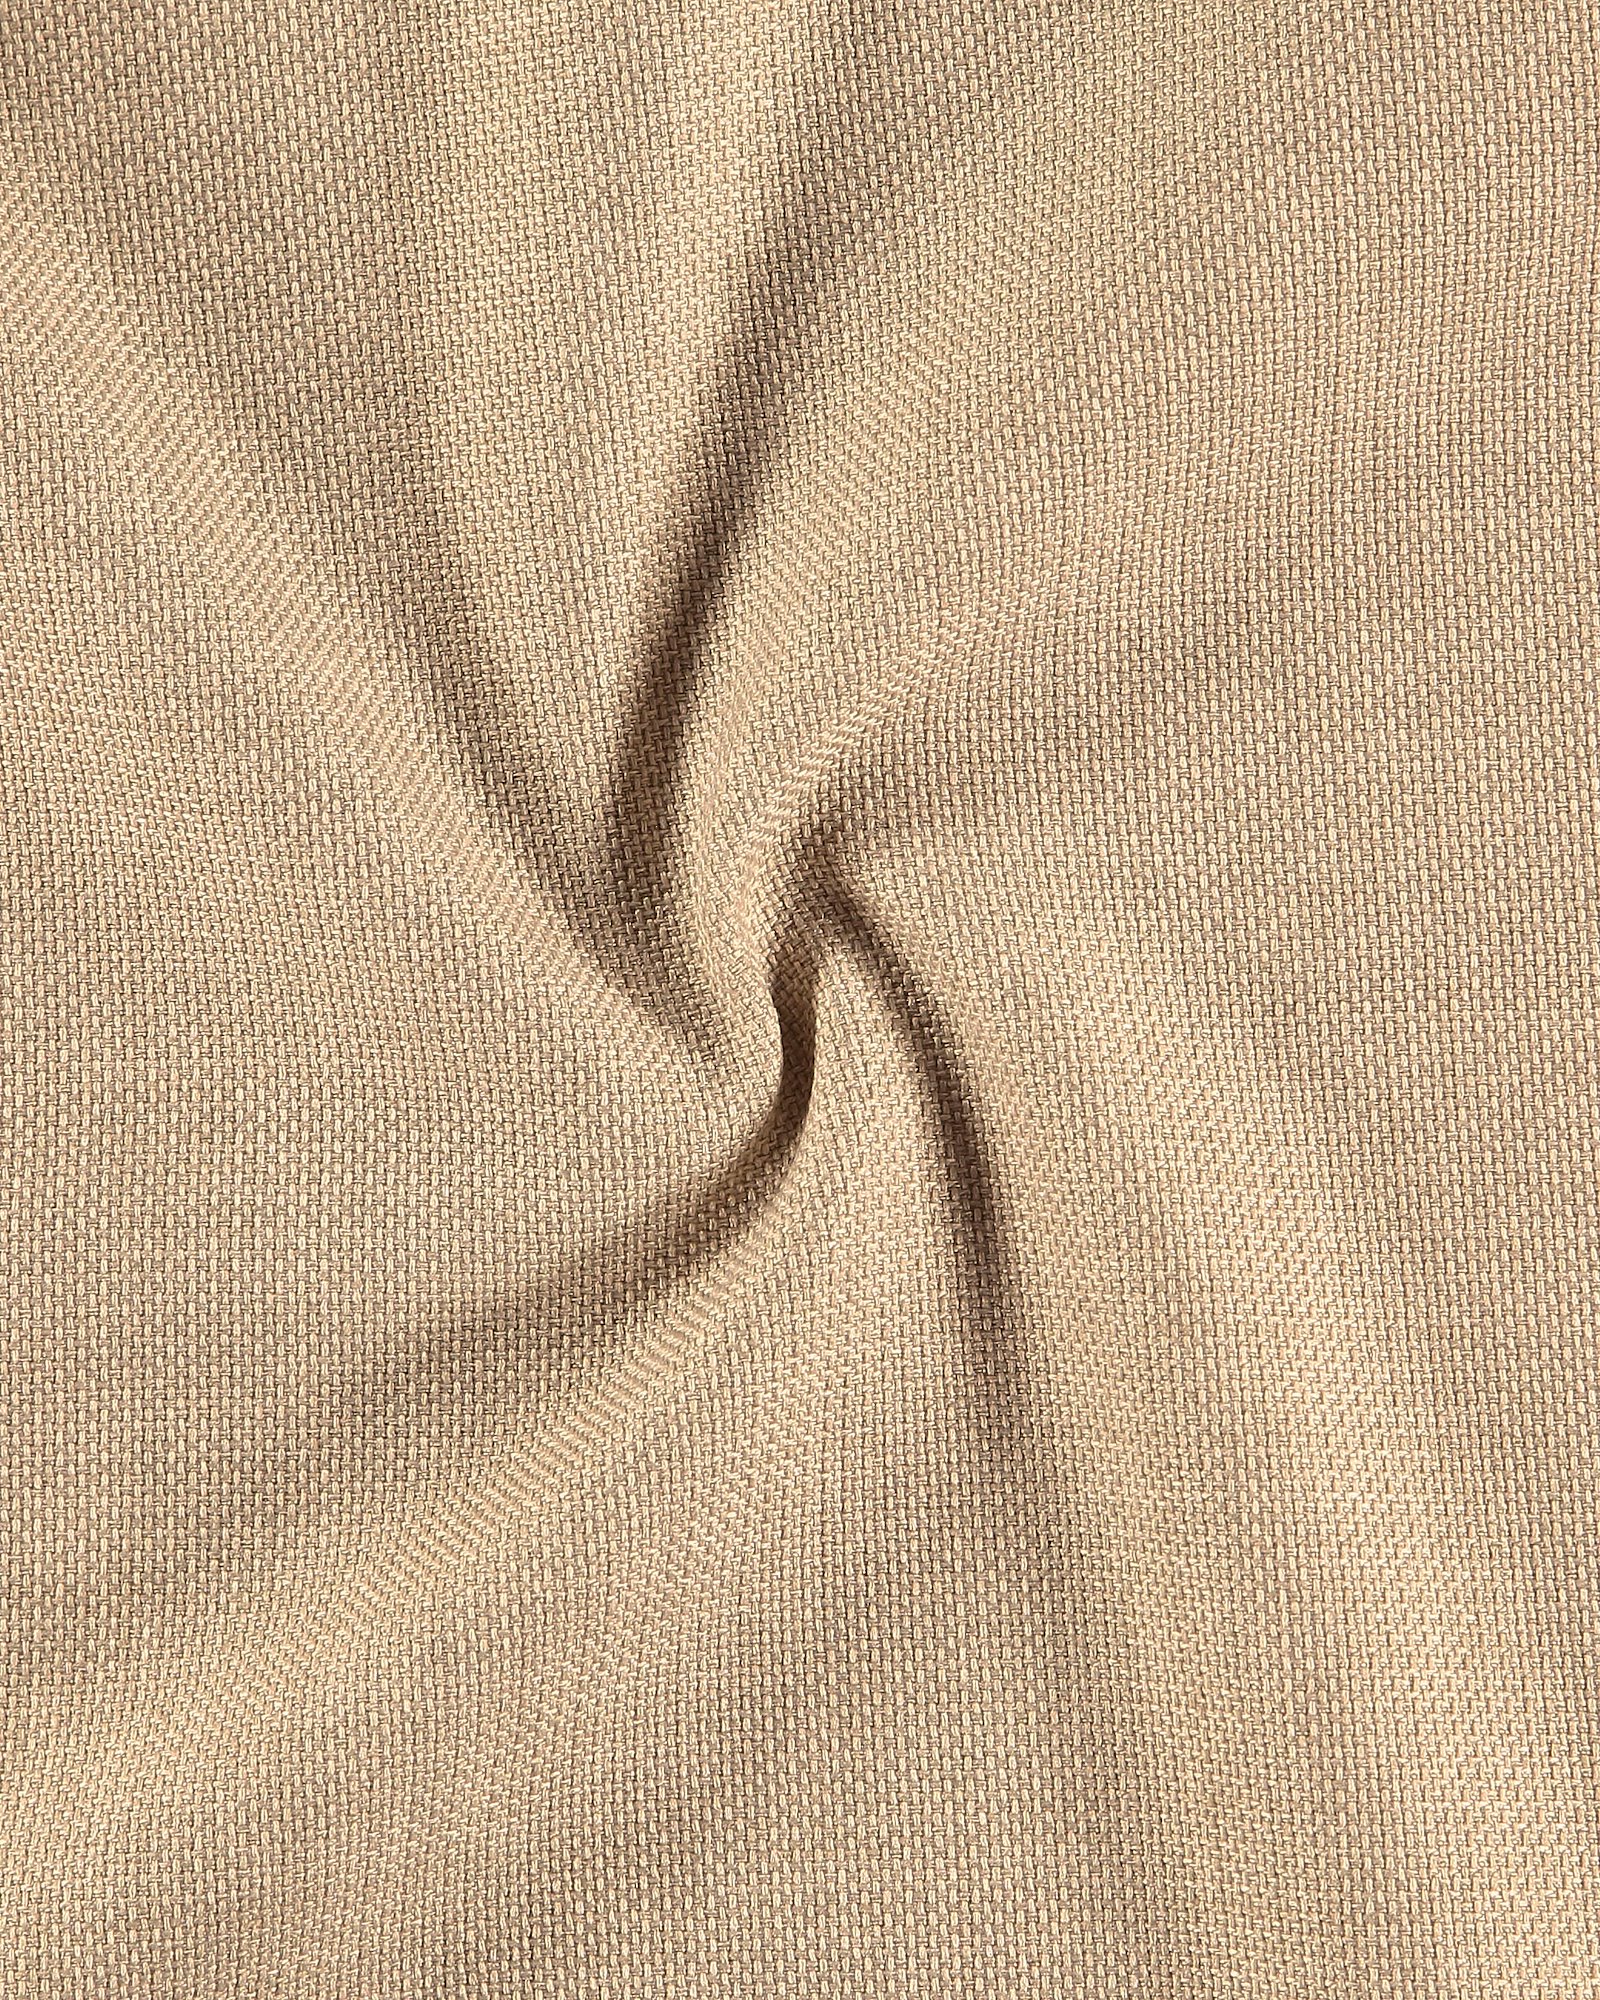 Upholstery fabric nature 821770_pack